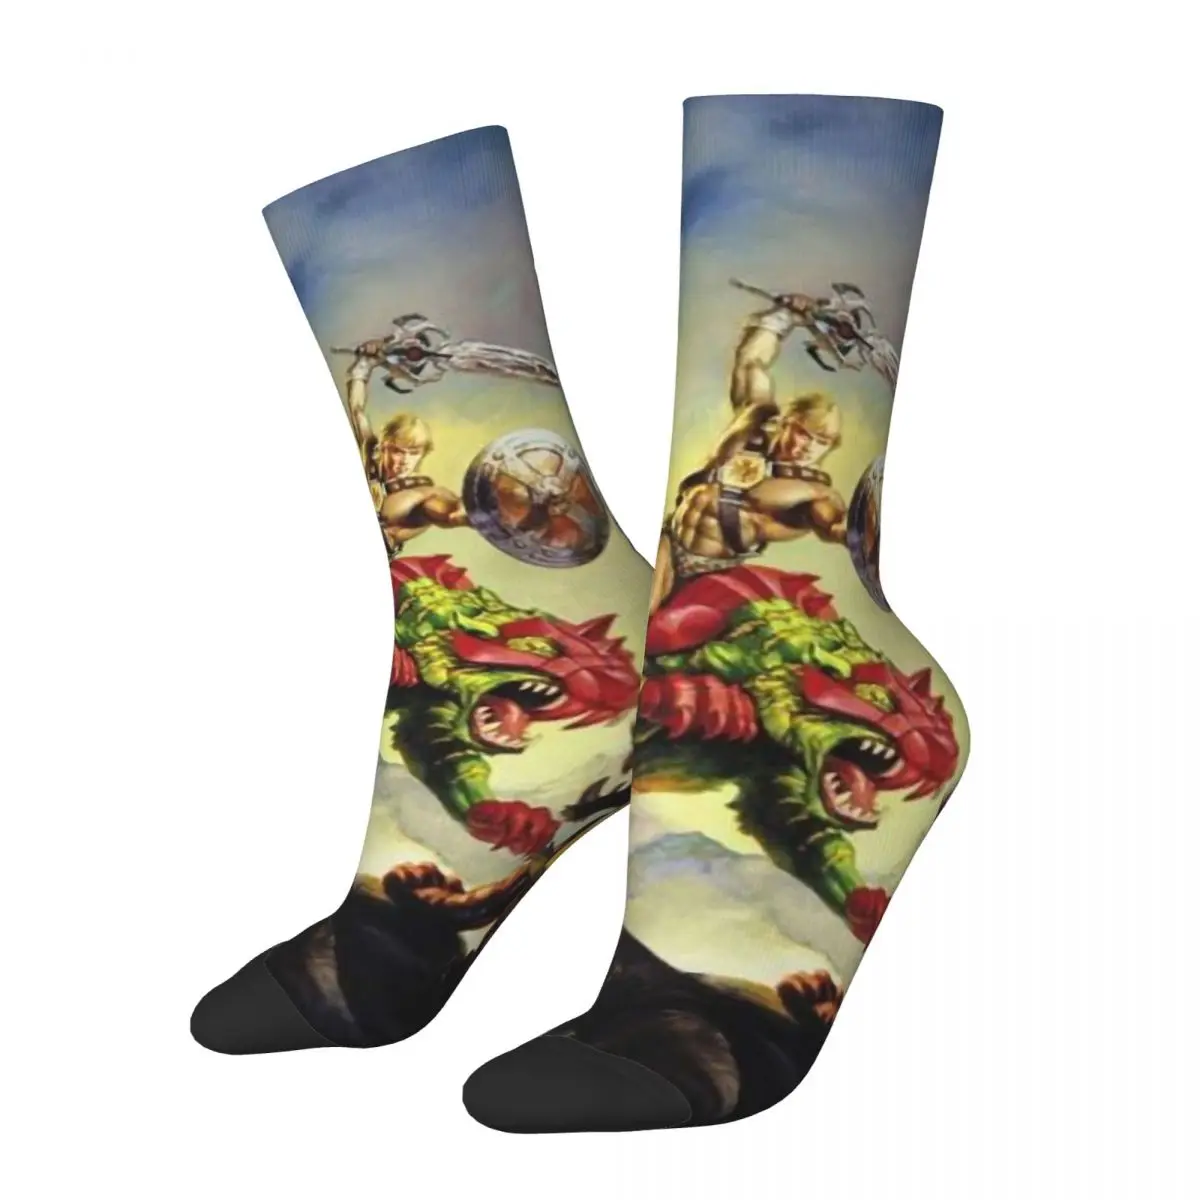 Funny Crazy Sock for Men Defeat The Enemy Hip Hop Vintage He-Man and the Masters of the Universe Pattern Printed Boys Crew Sock